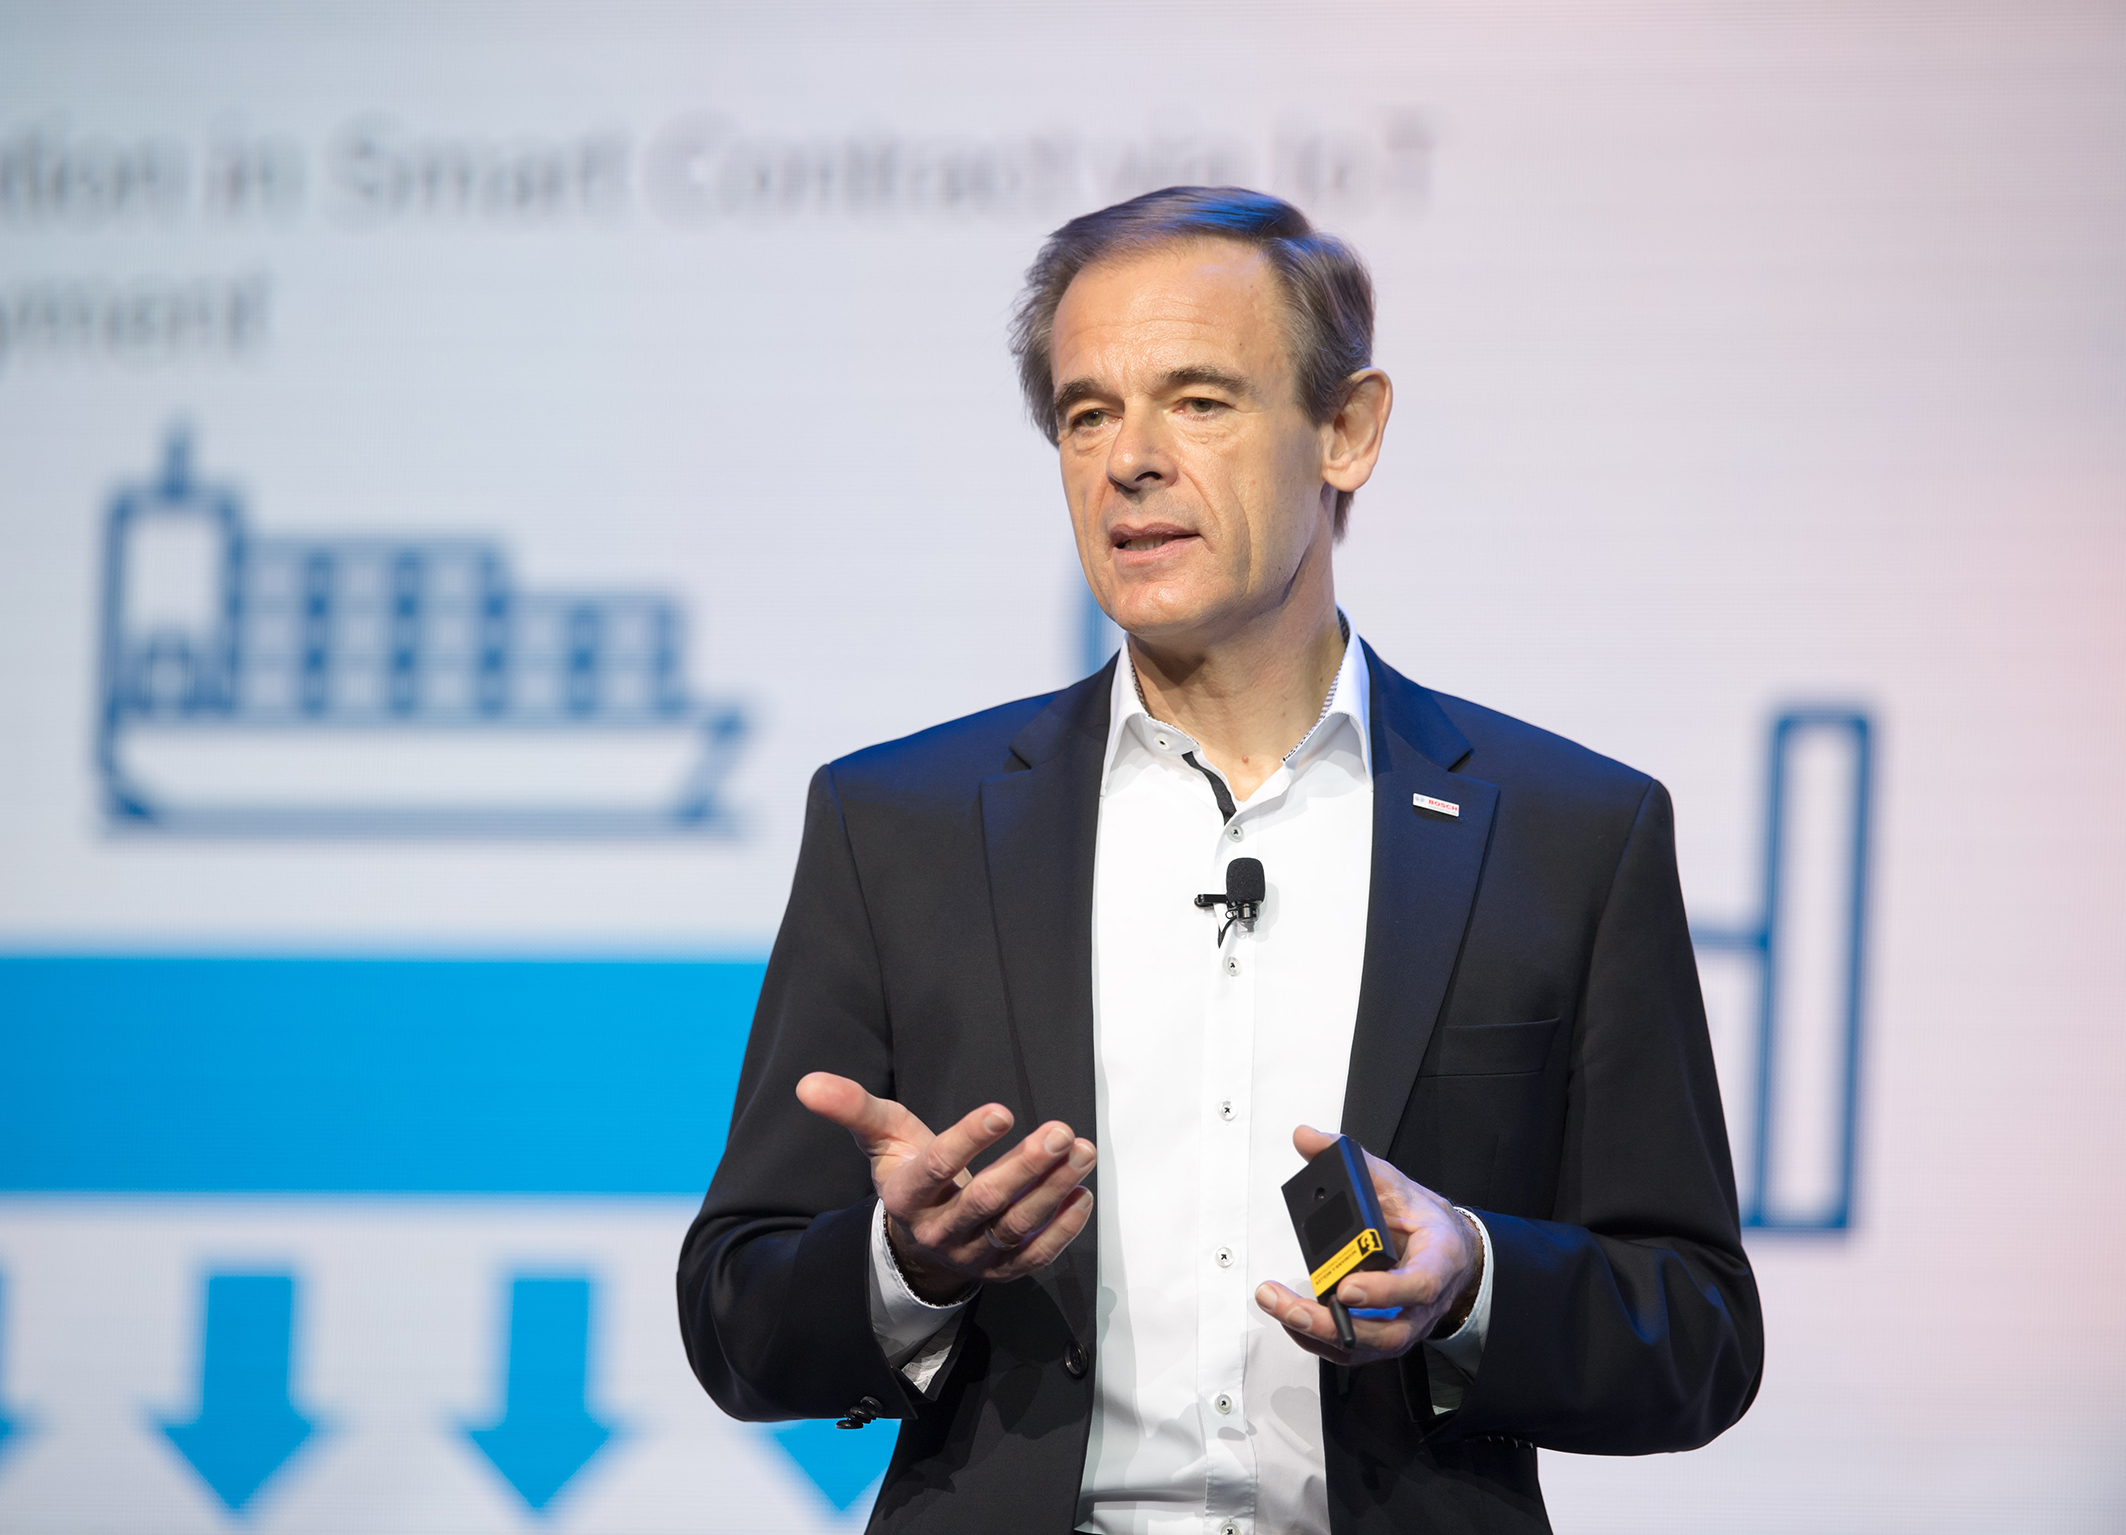 Taking the internet of things to the next level: Bosch-Chef Dr. Volkmar Denner bei der Keynote der Bosch Connected World 2017